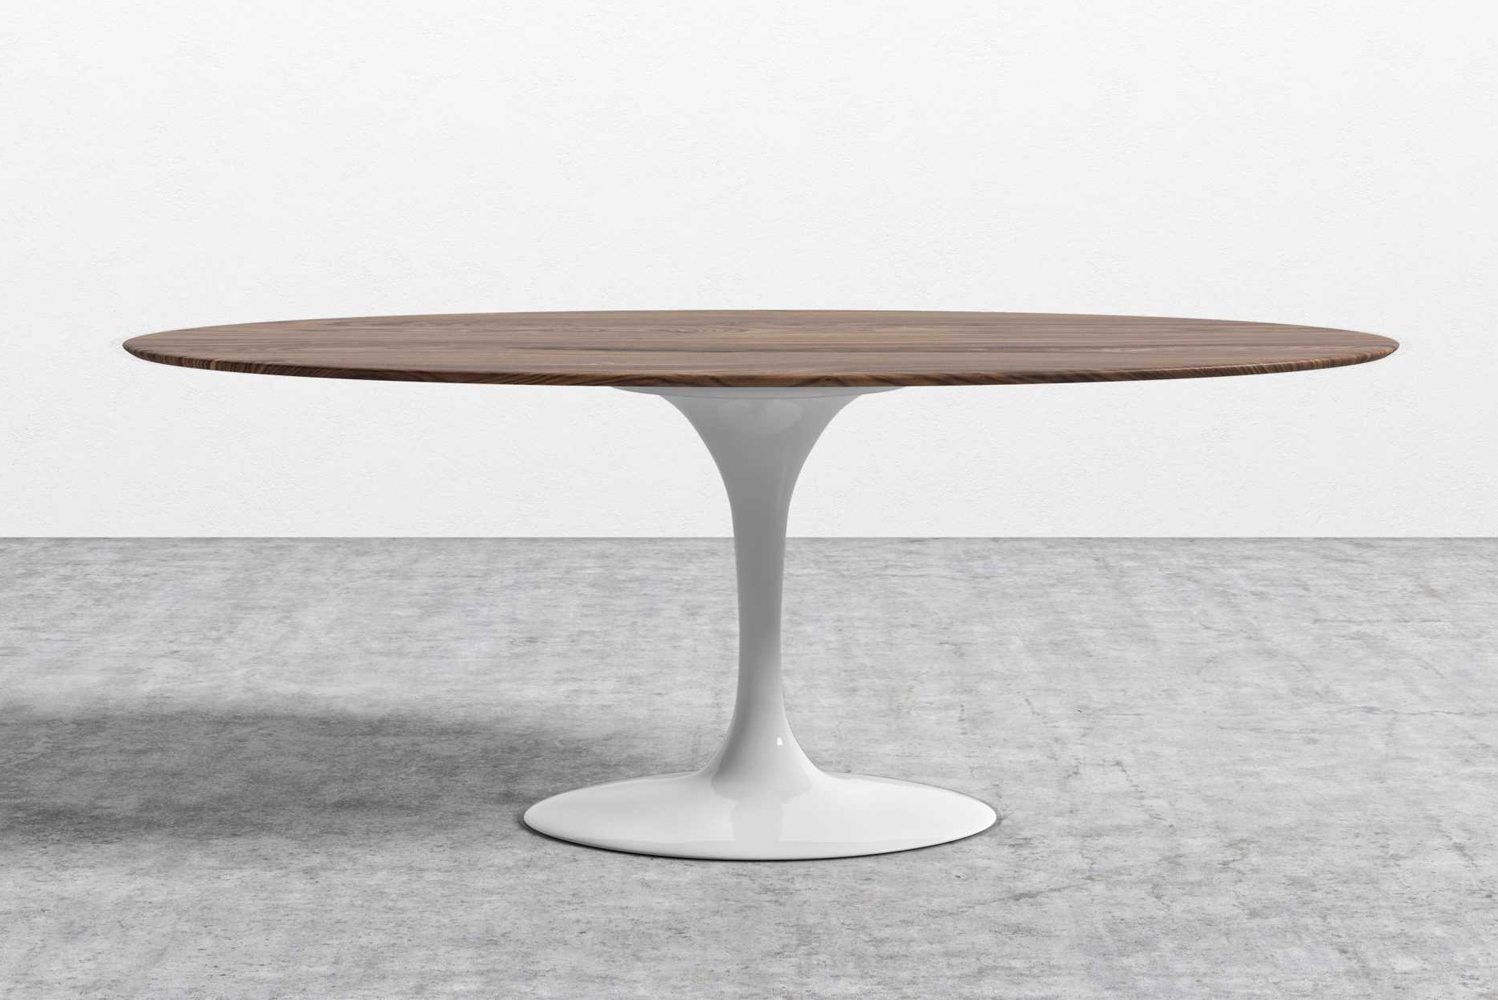 Rove Concepts announced the Tulip table series which was inspired by Finnish and American mid-century architecture